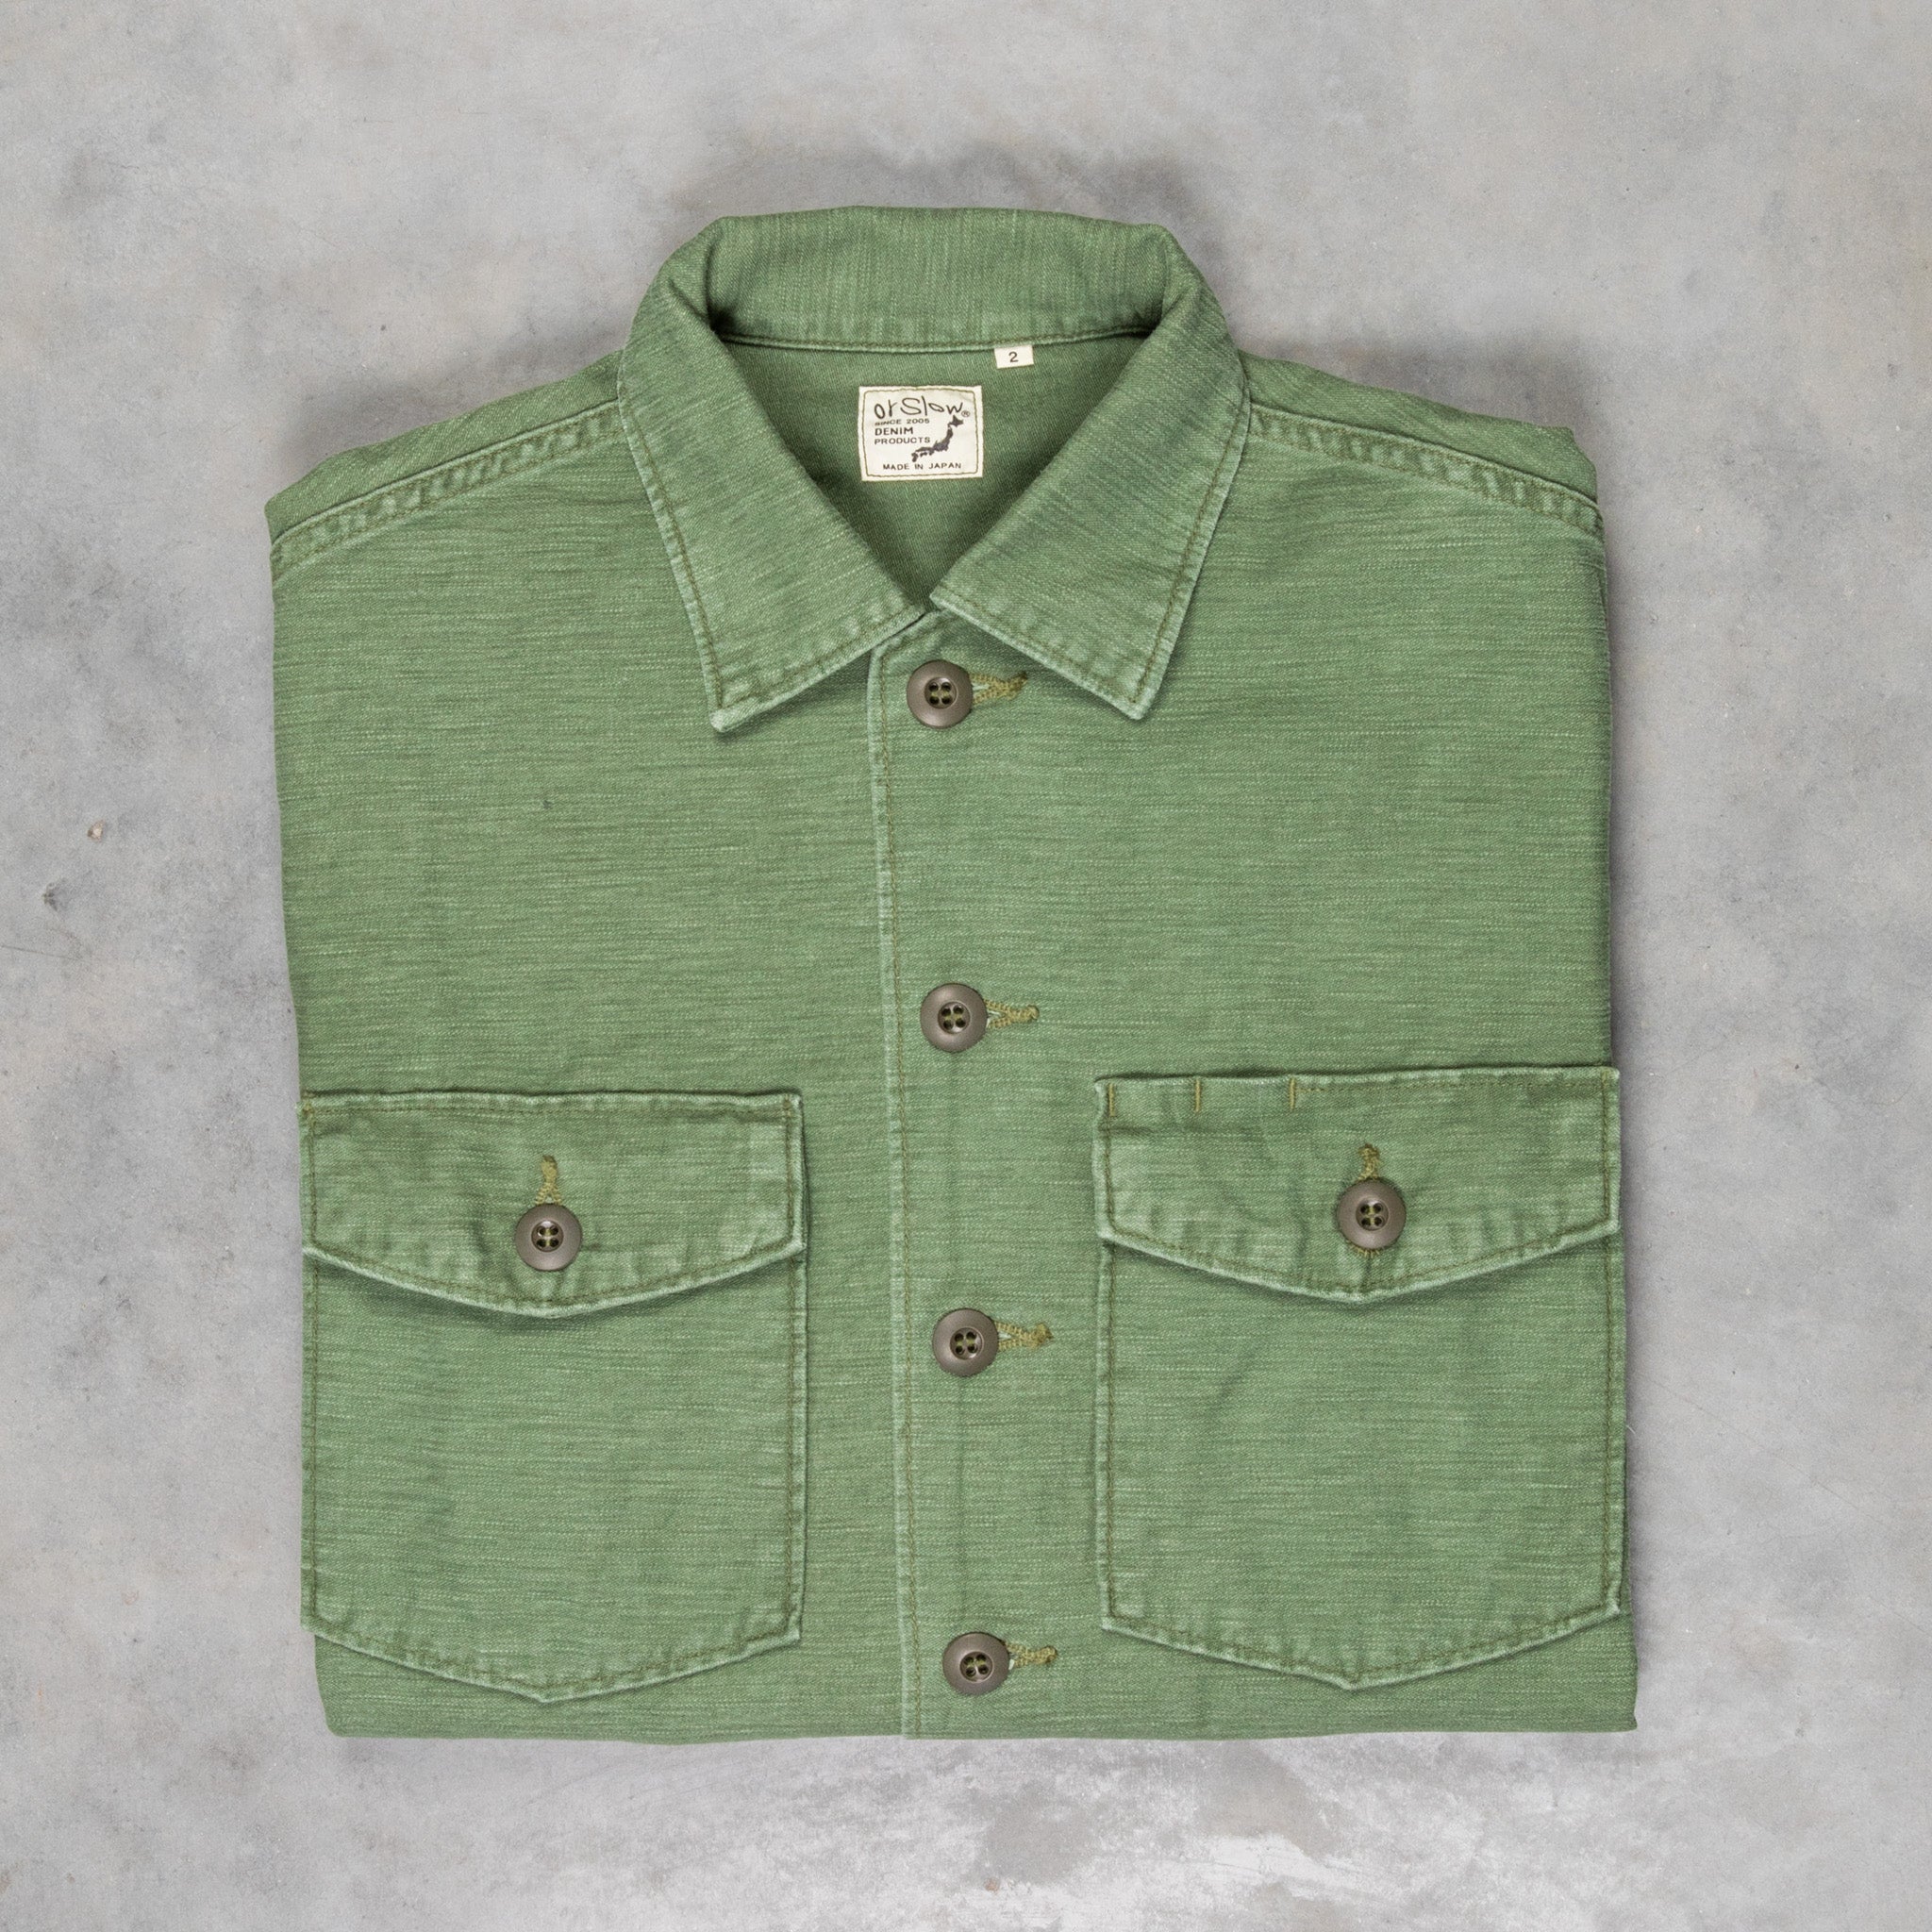 Orslow US army shirt back satin green used